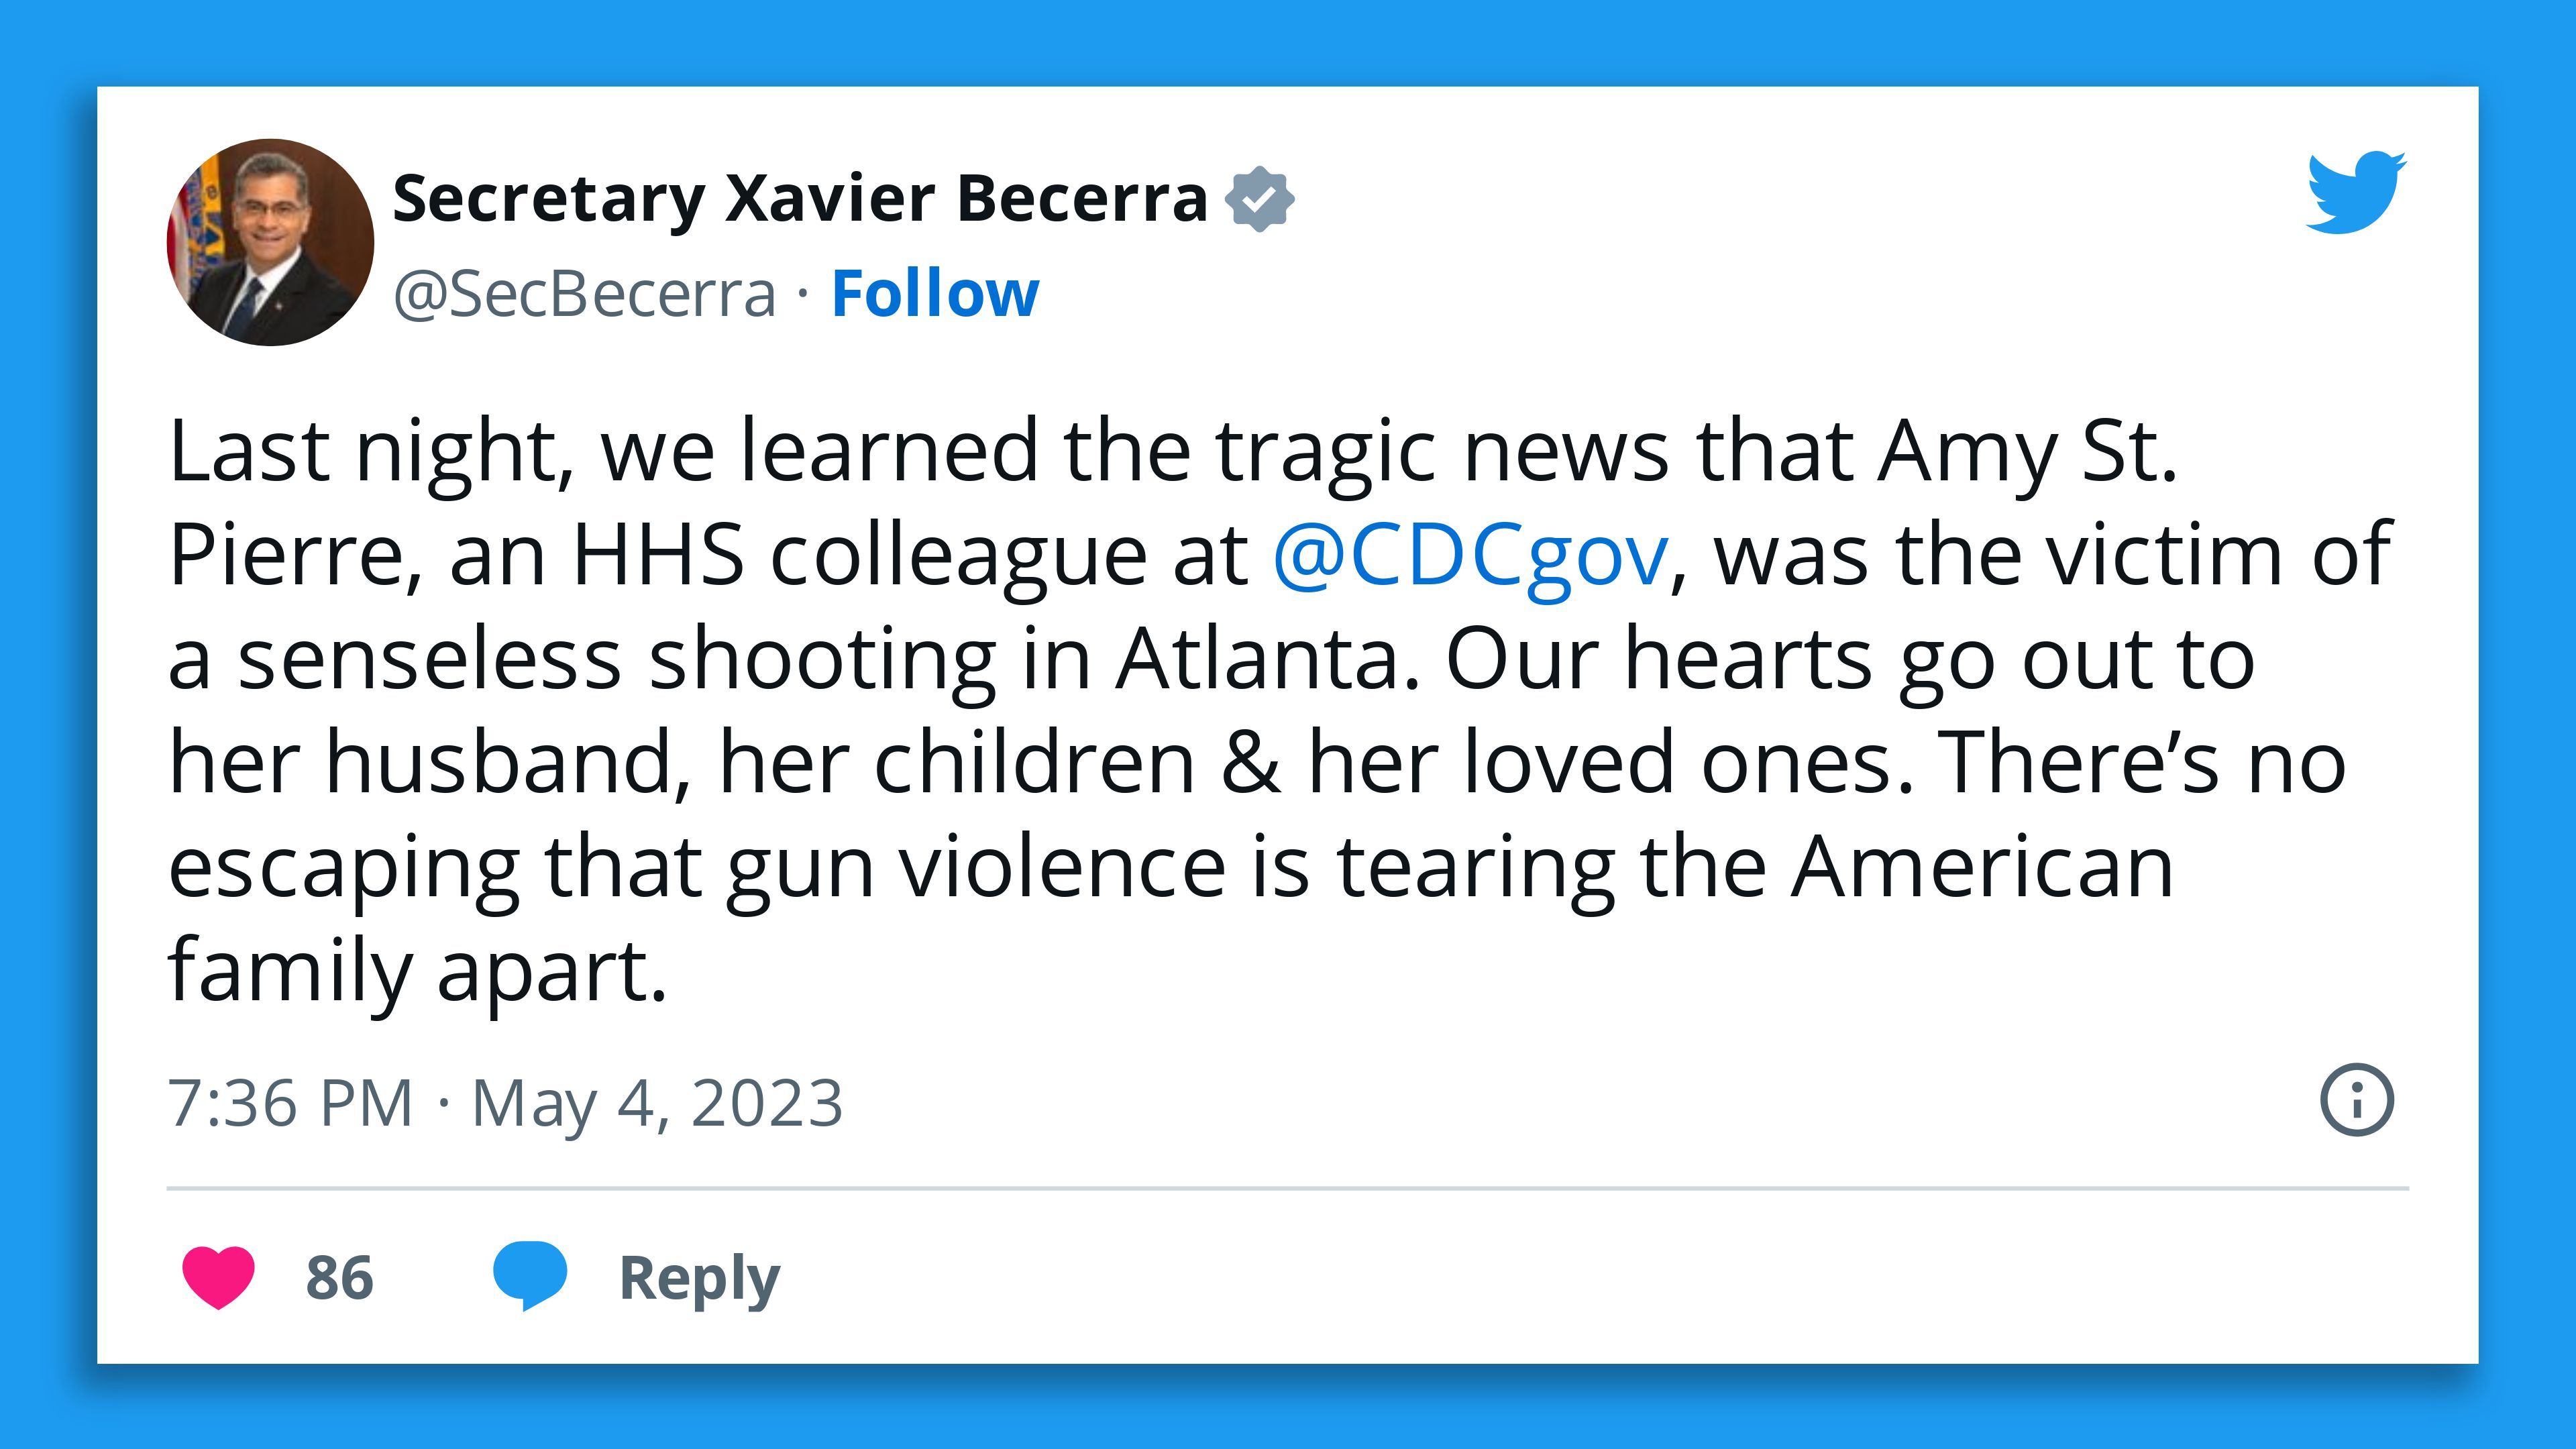 A screenshot of a tweet by HHS Secretary Xavier Becerra saying: "Last night, we learned the tragic news that Amy St. Pierre, an HHS colleague at  @CDCgov , was the victim of a senseless shooting in Atlanta. Our hearts go out to her husband, her children & her loved ones. There’s no escaping that gun violence is tearing the American family apart."